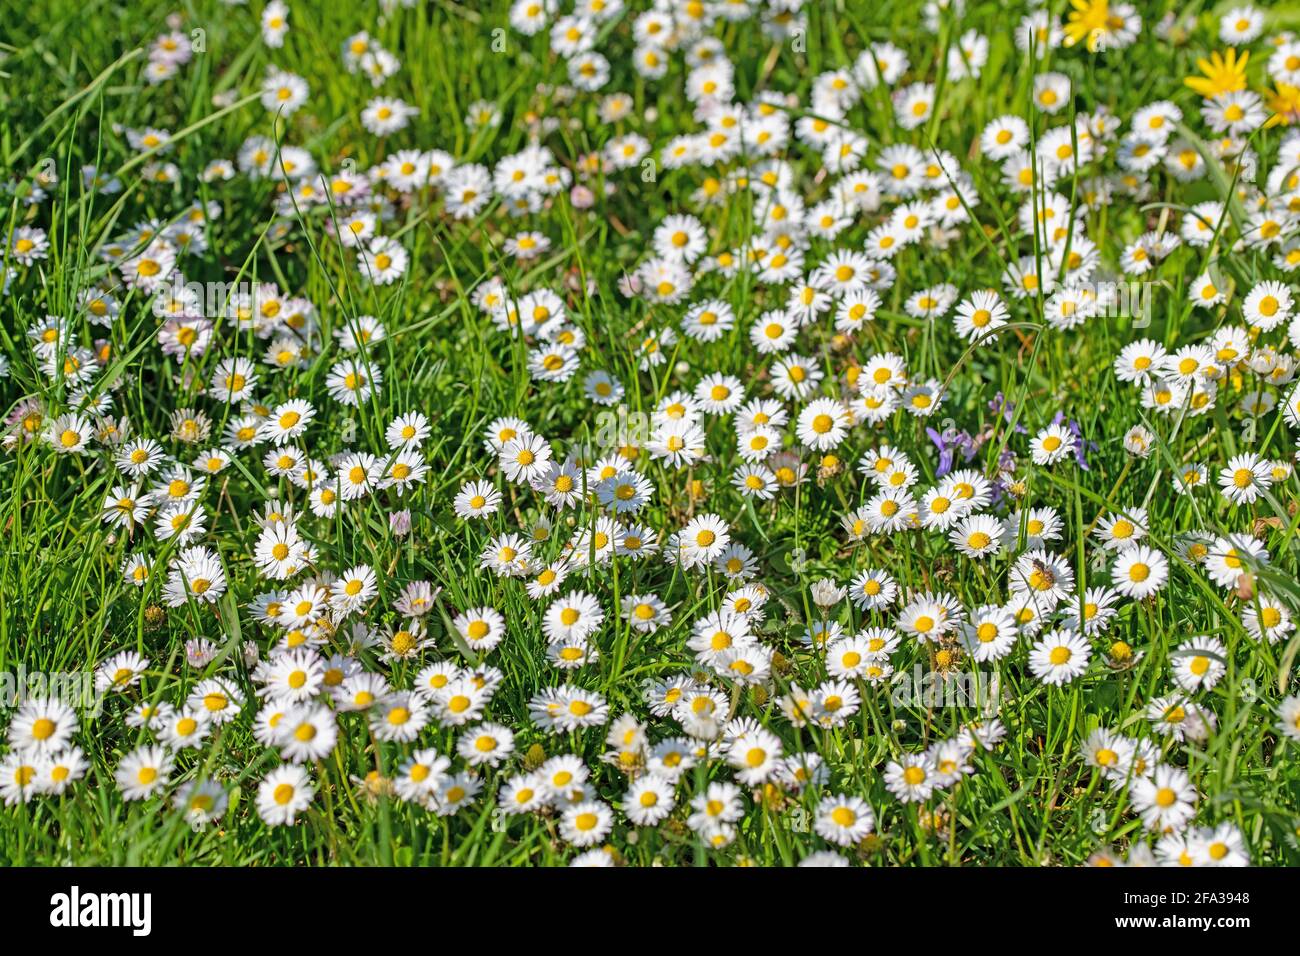 Daisies, Bellis perennis, in a meadow Stock Photo